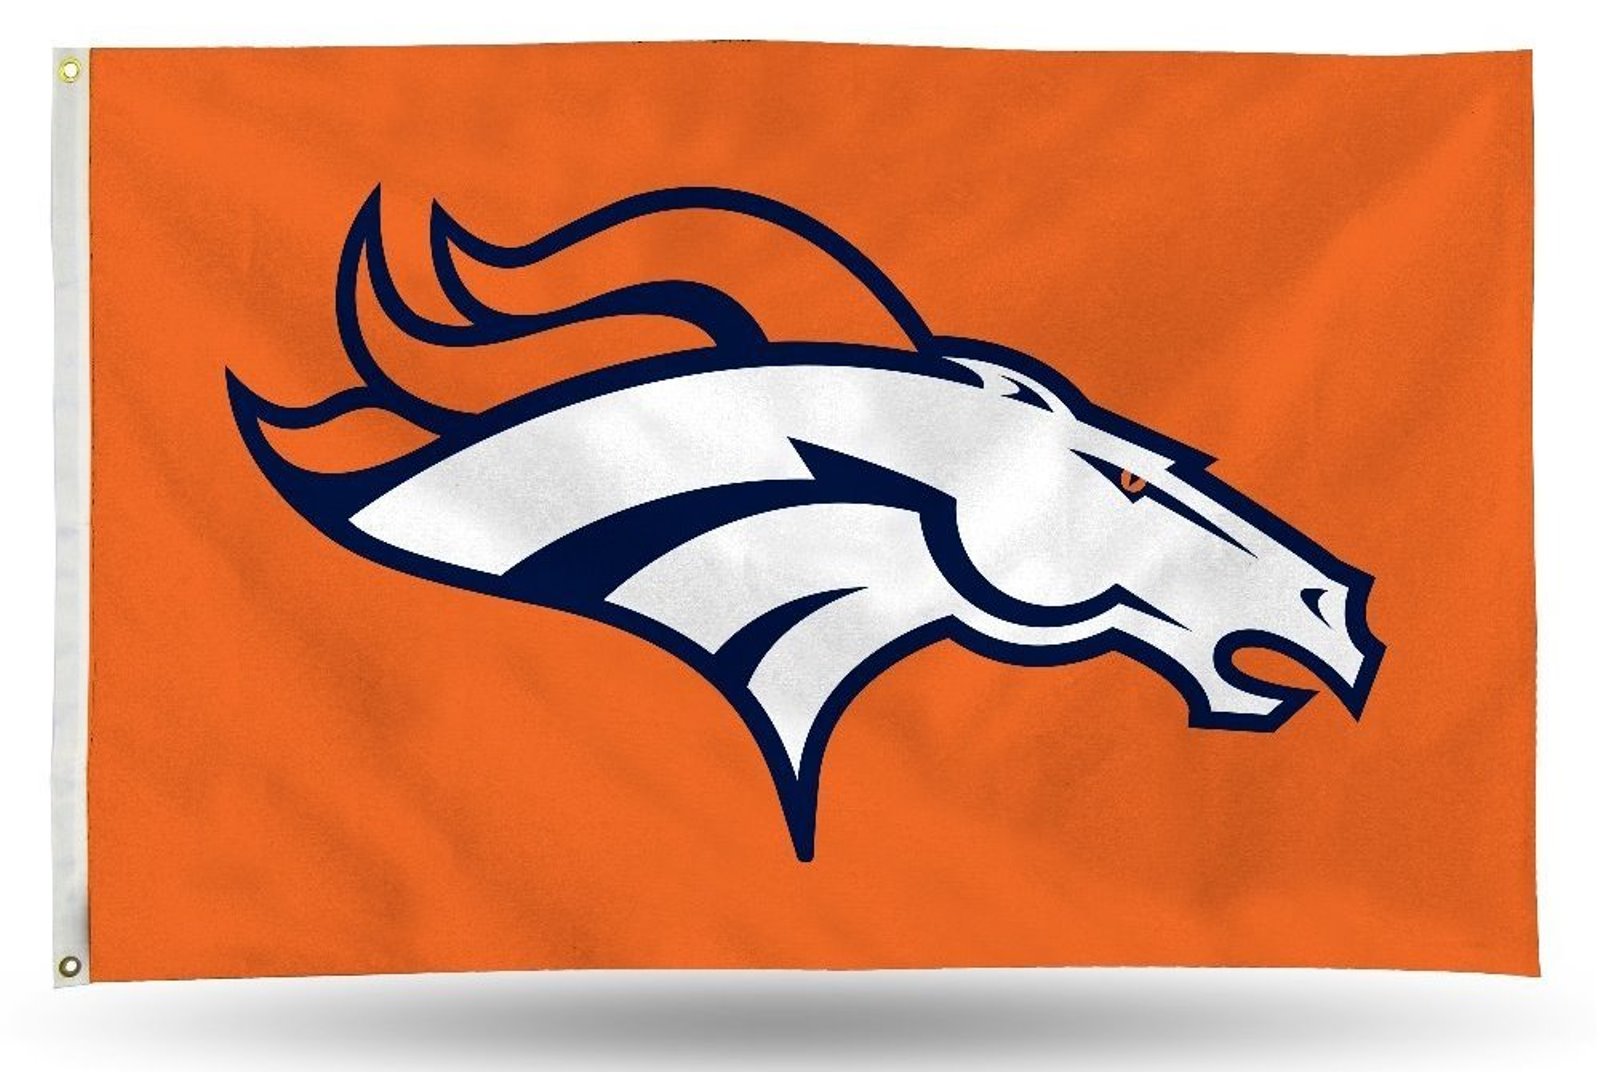 Details about Denver Broncos LOGO Rico 3x5 Flag w/grommets Outdoor House  Banner Football.